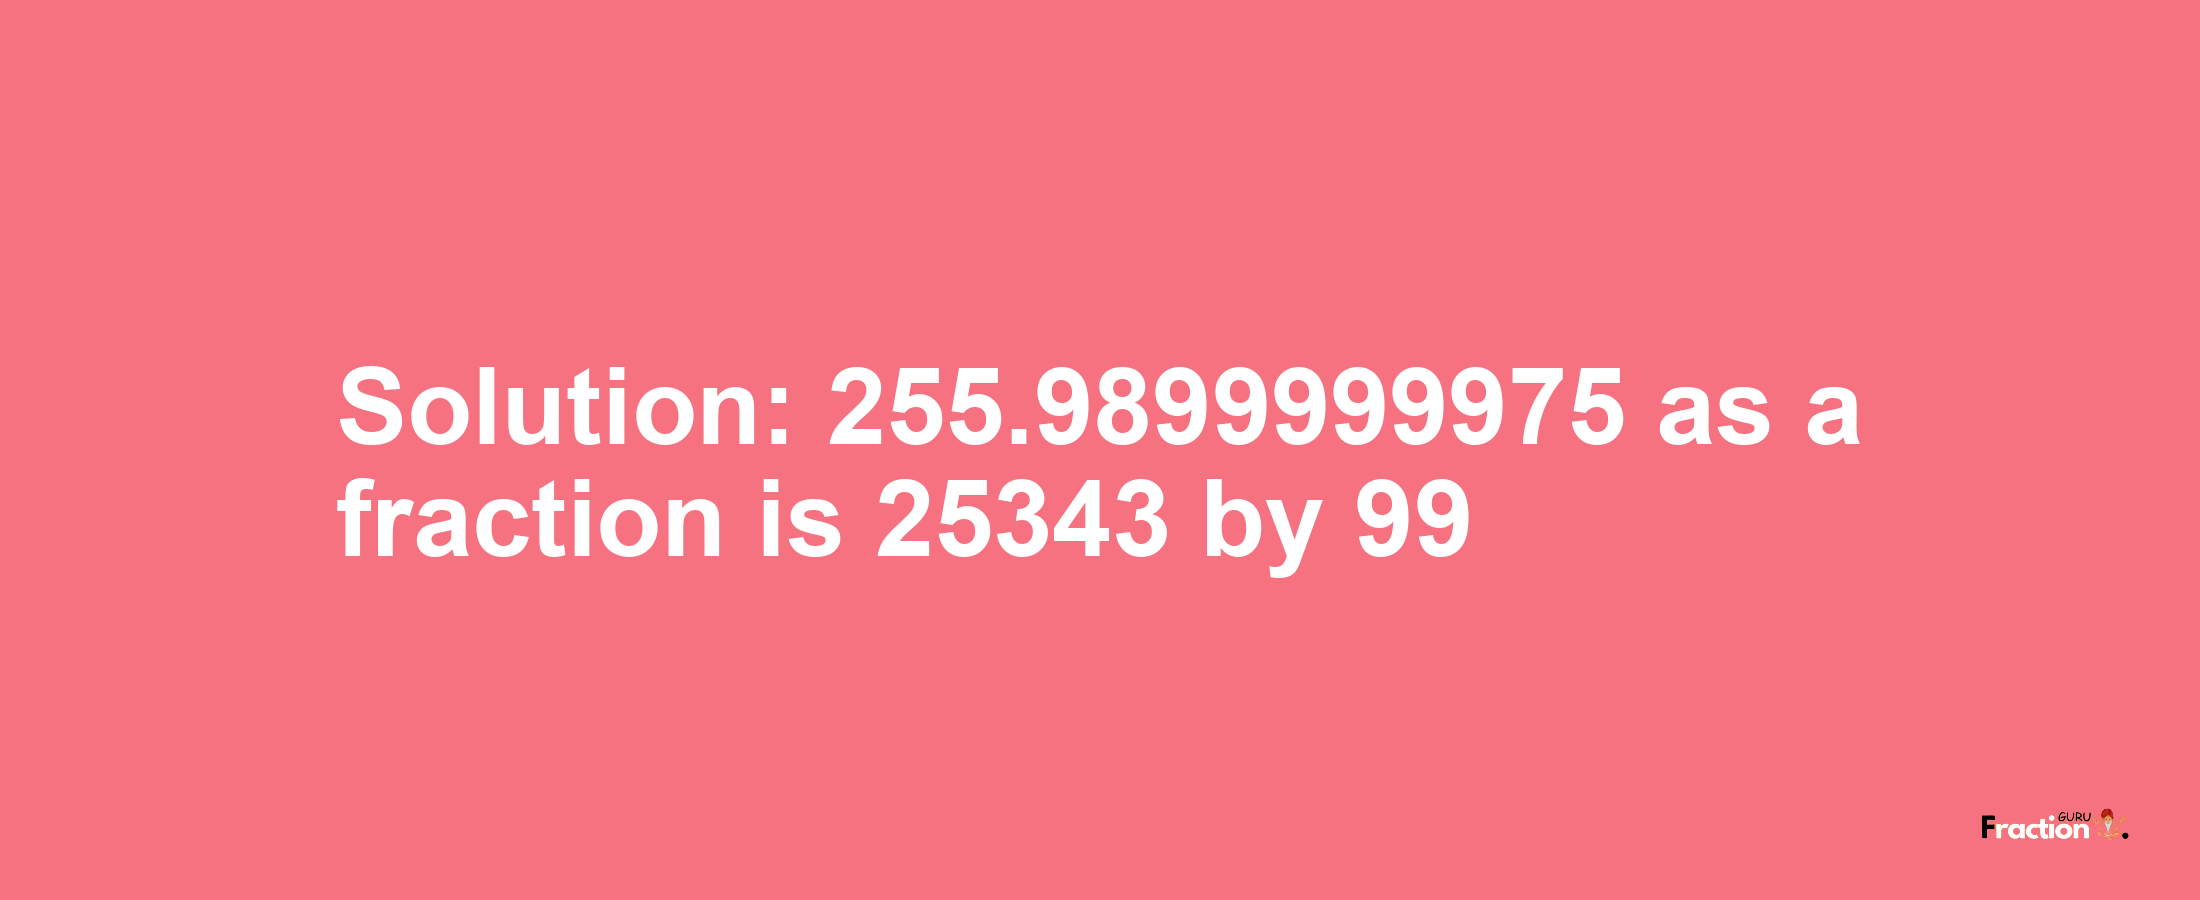 Solution:255.9899999975 as a fraction is 25343/99